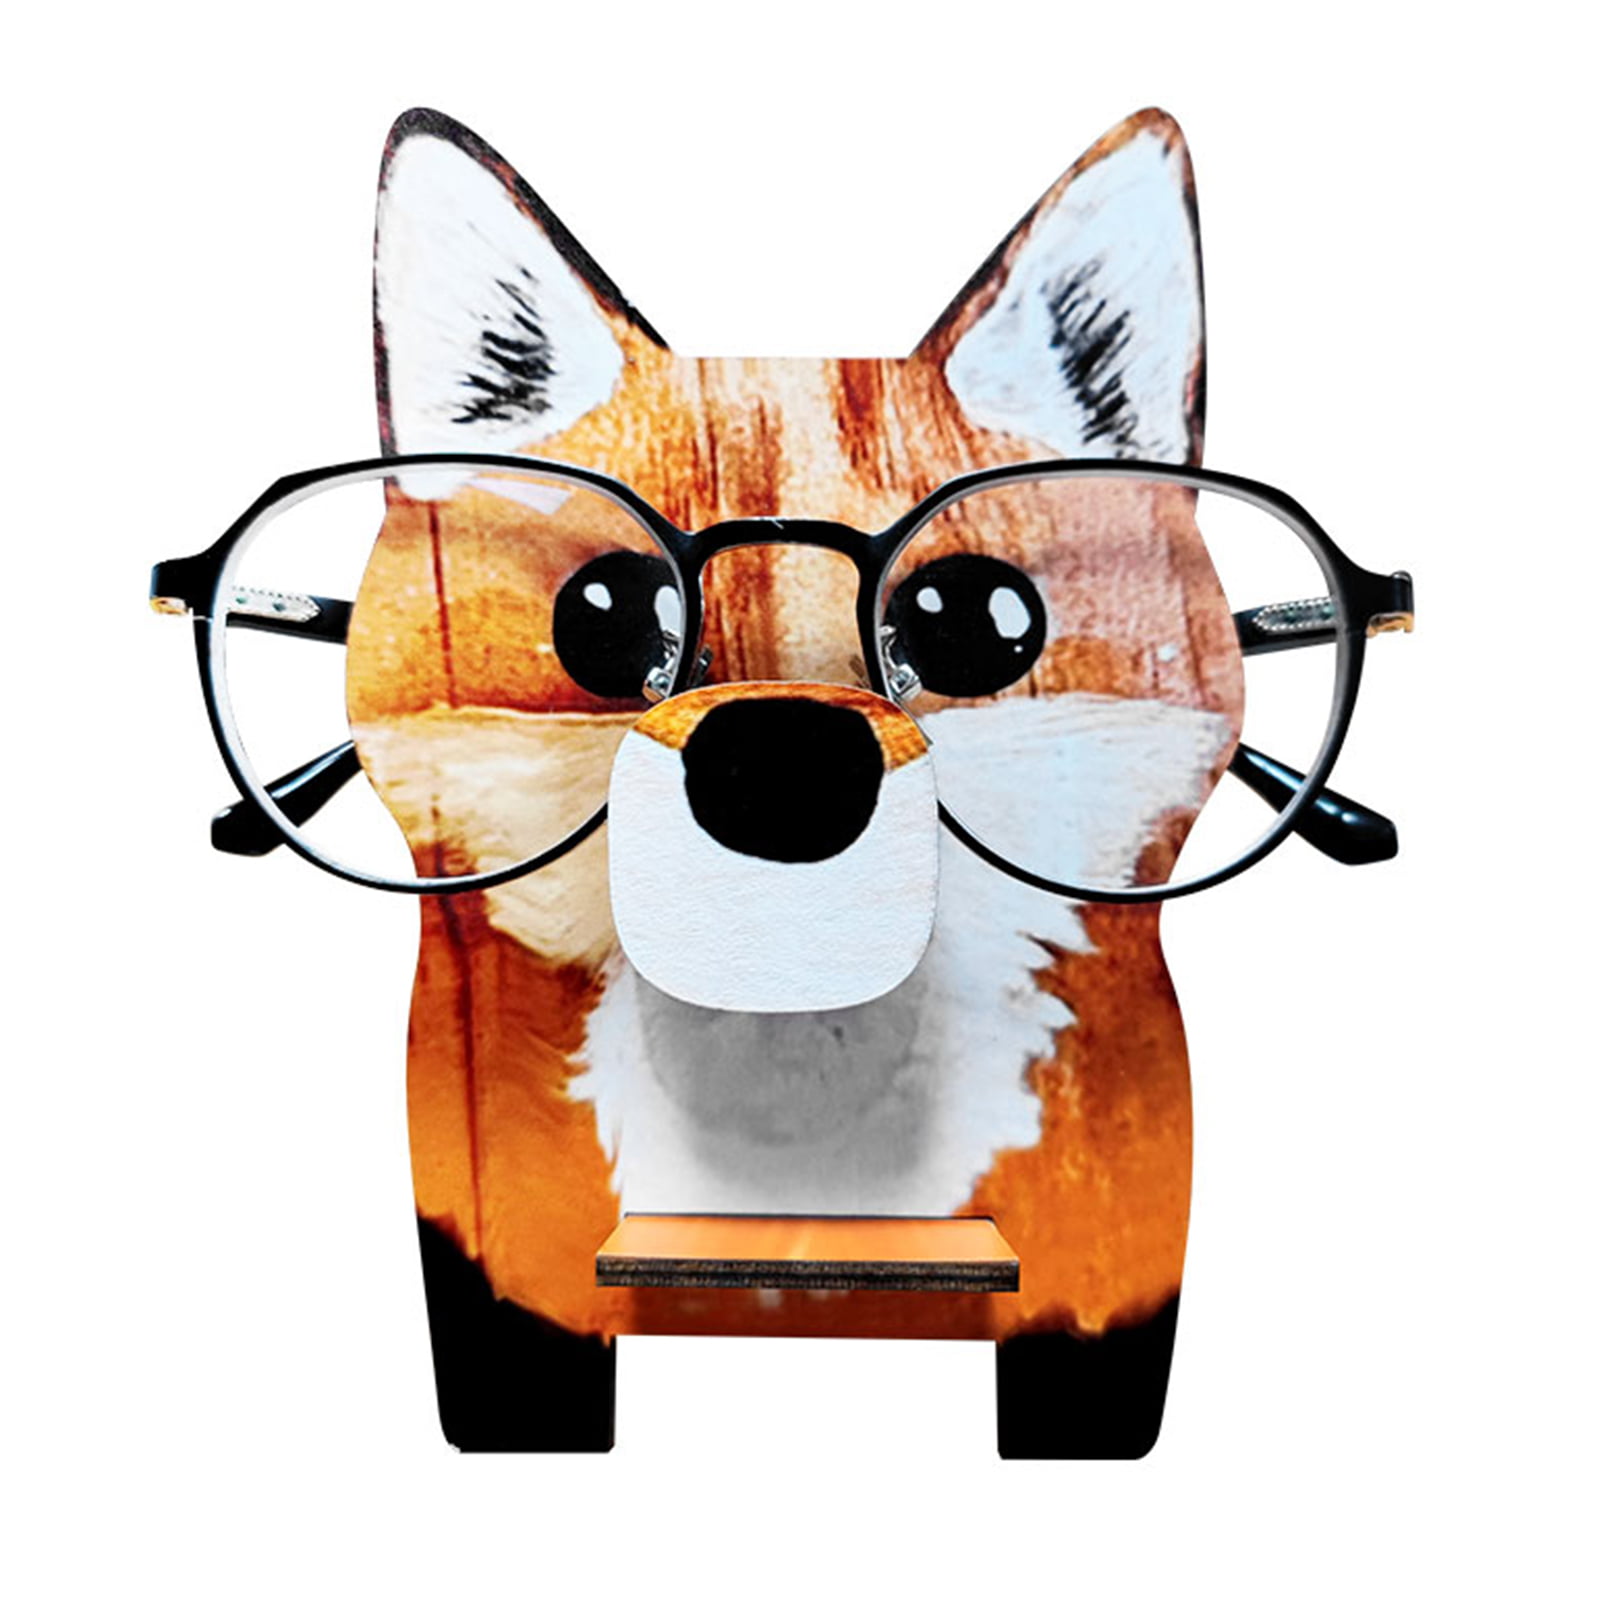 FABSELLER Eyeglass Holder Sunglasses Animal Spectacle Display Stand Home Office Desk Decor Glasses Stand Decorative Display Rack